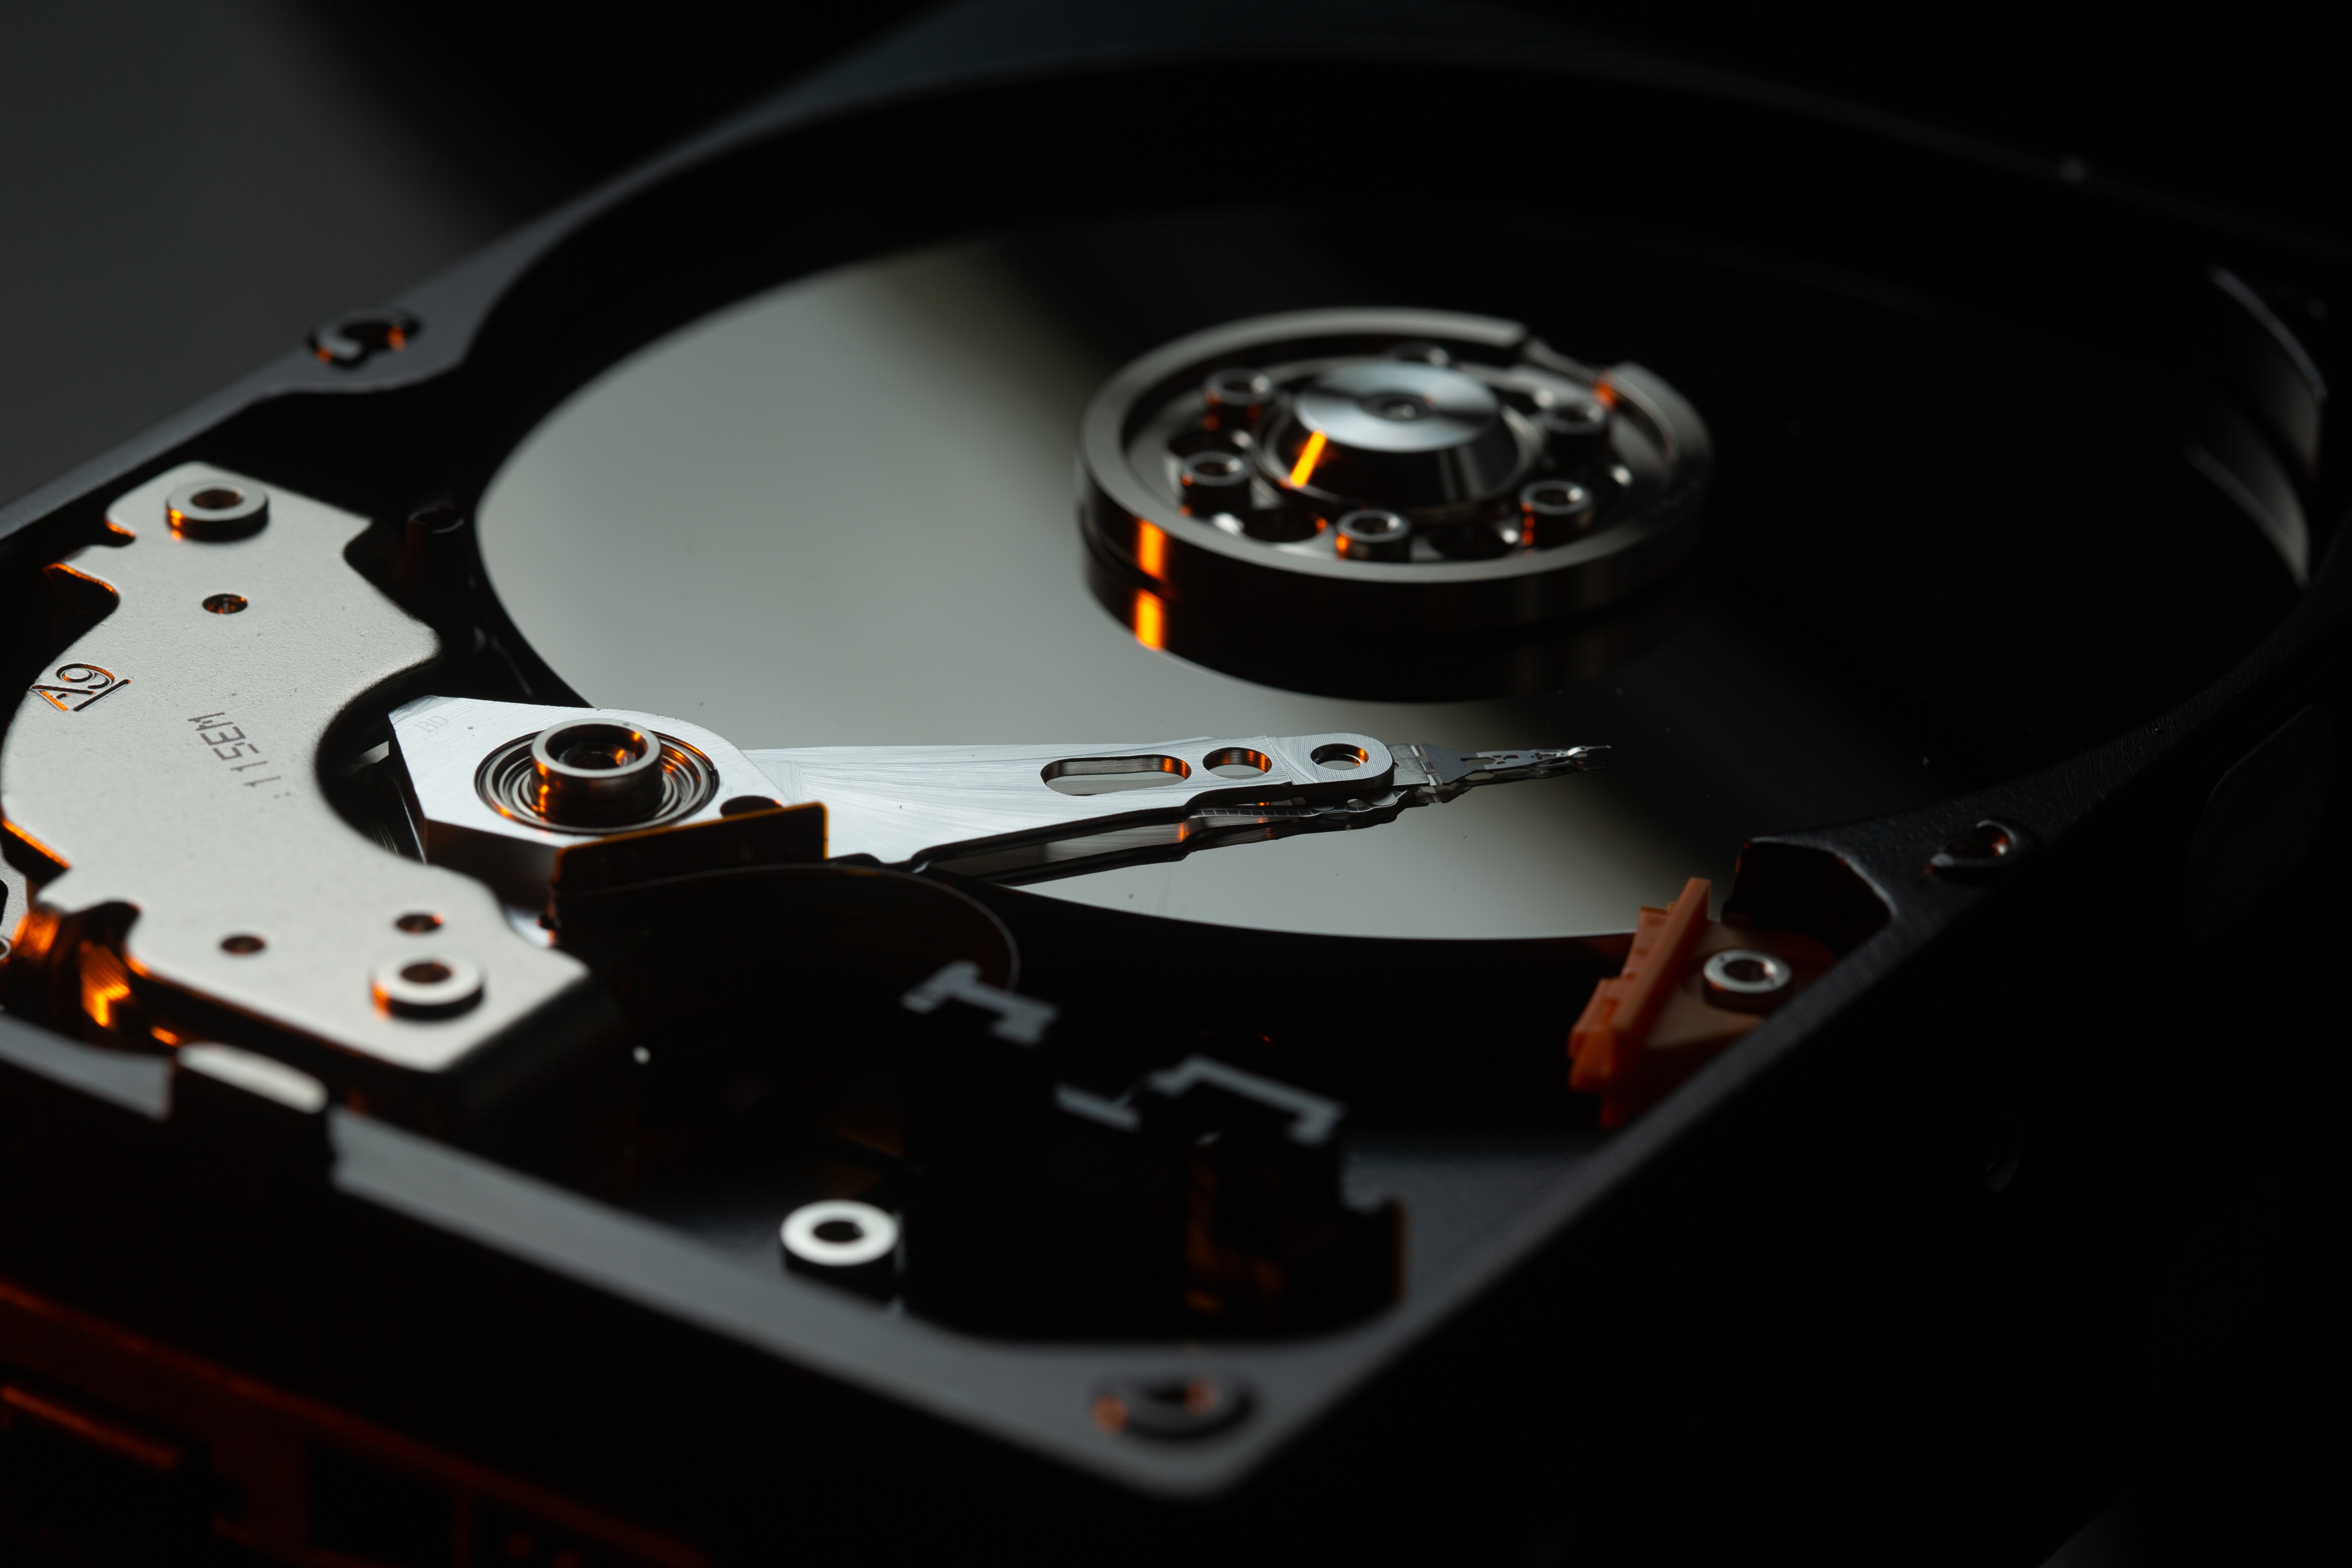 An image of a bare hard drive platter with the head and disk exposed.